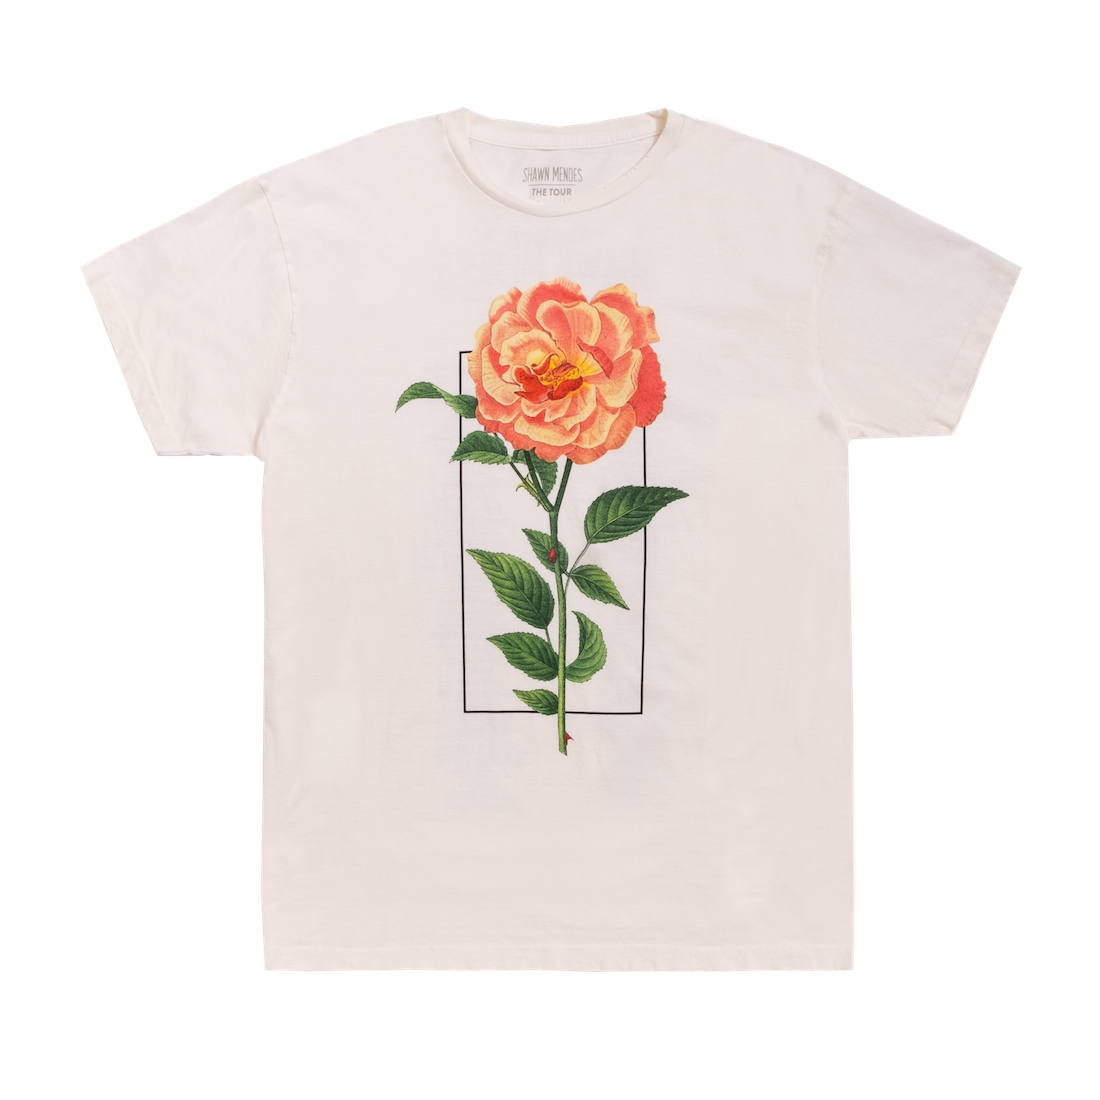 TOUR T-SHIRT II – Shawn Mendes | Official Store